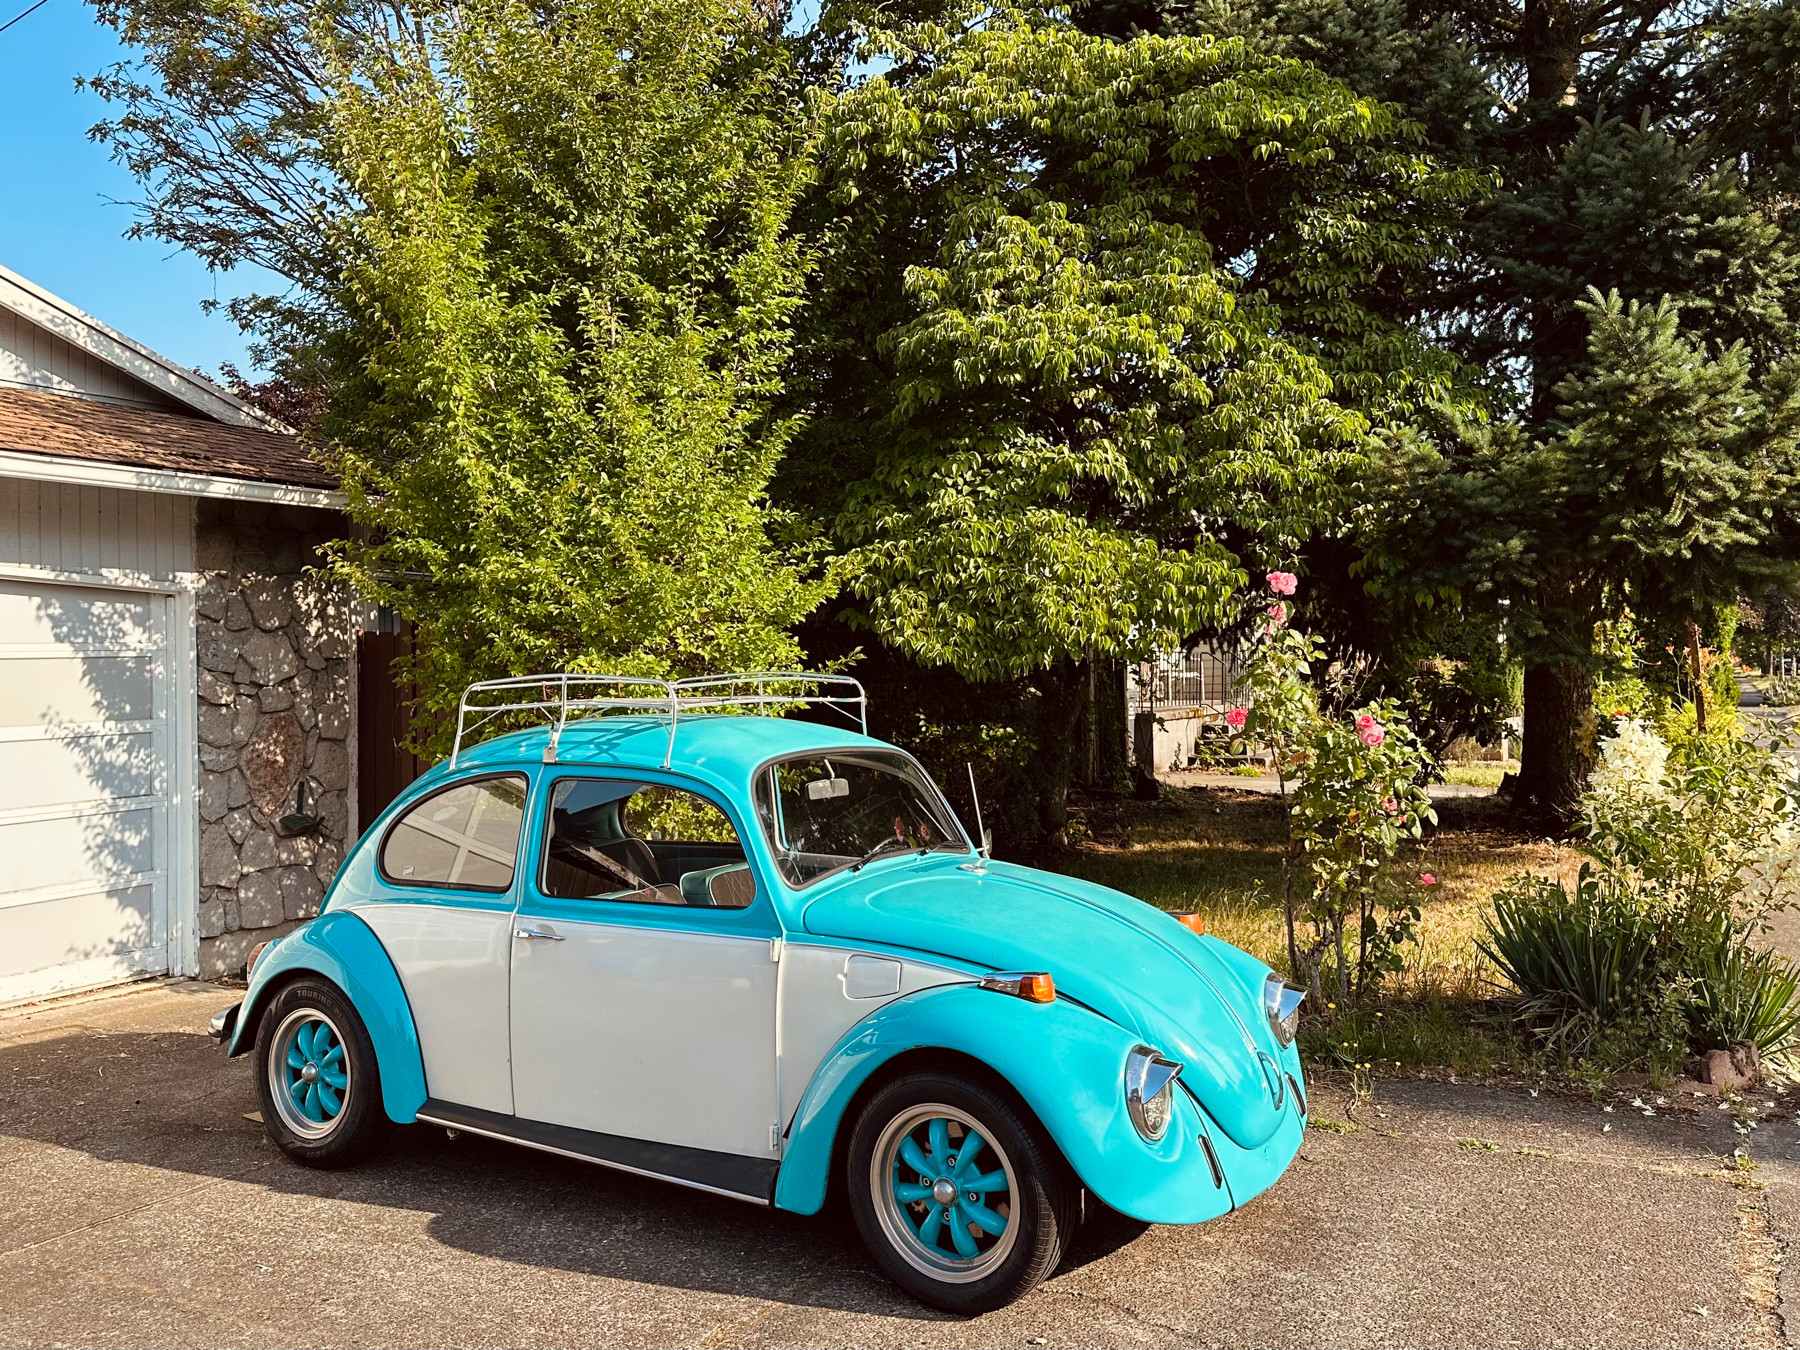 A vintage VW Beetle car parked in a driveway. It is two toned in color, sky blue and white, and has trim and roof rack in matching steel. It it lit by the warm light of the morning sun.